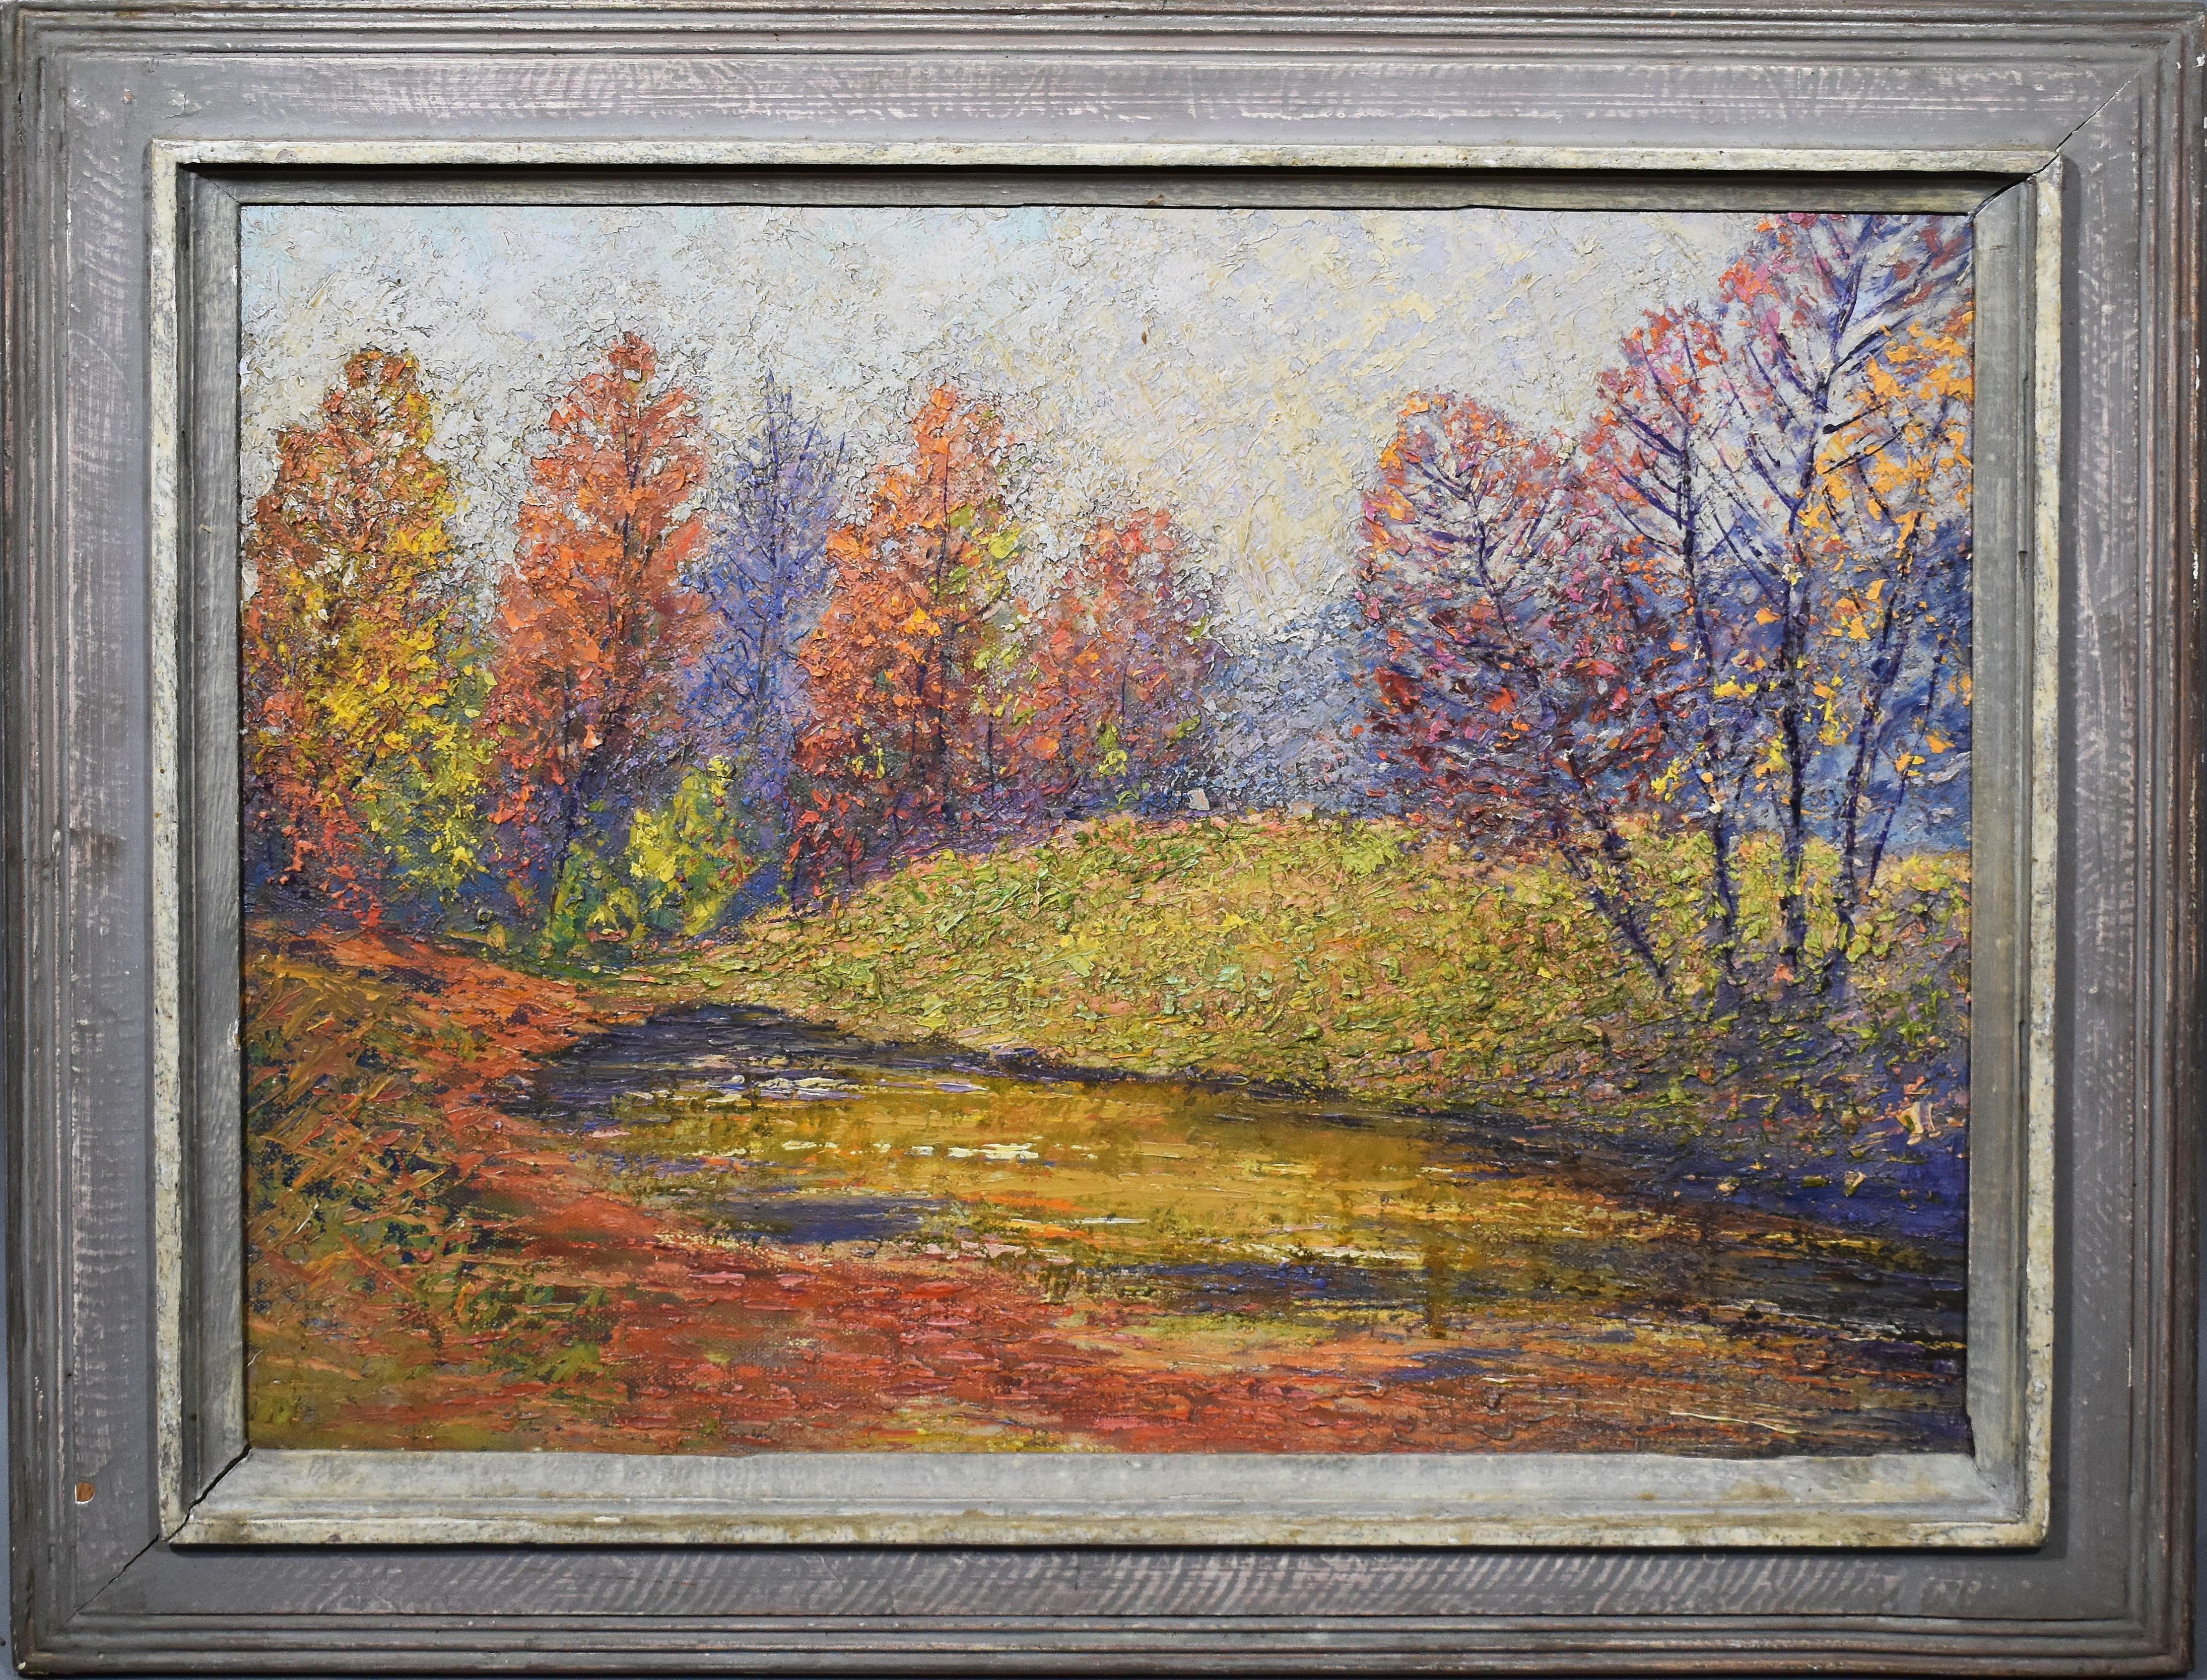 Unknown Abstract Painting - Antique American School Heavy Impasto Fall Landscape Original Fauve Oil Painting